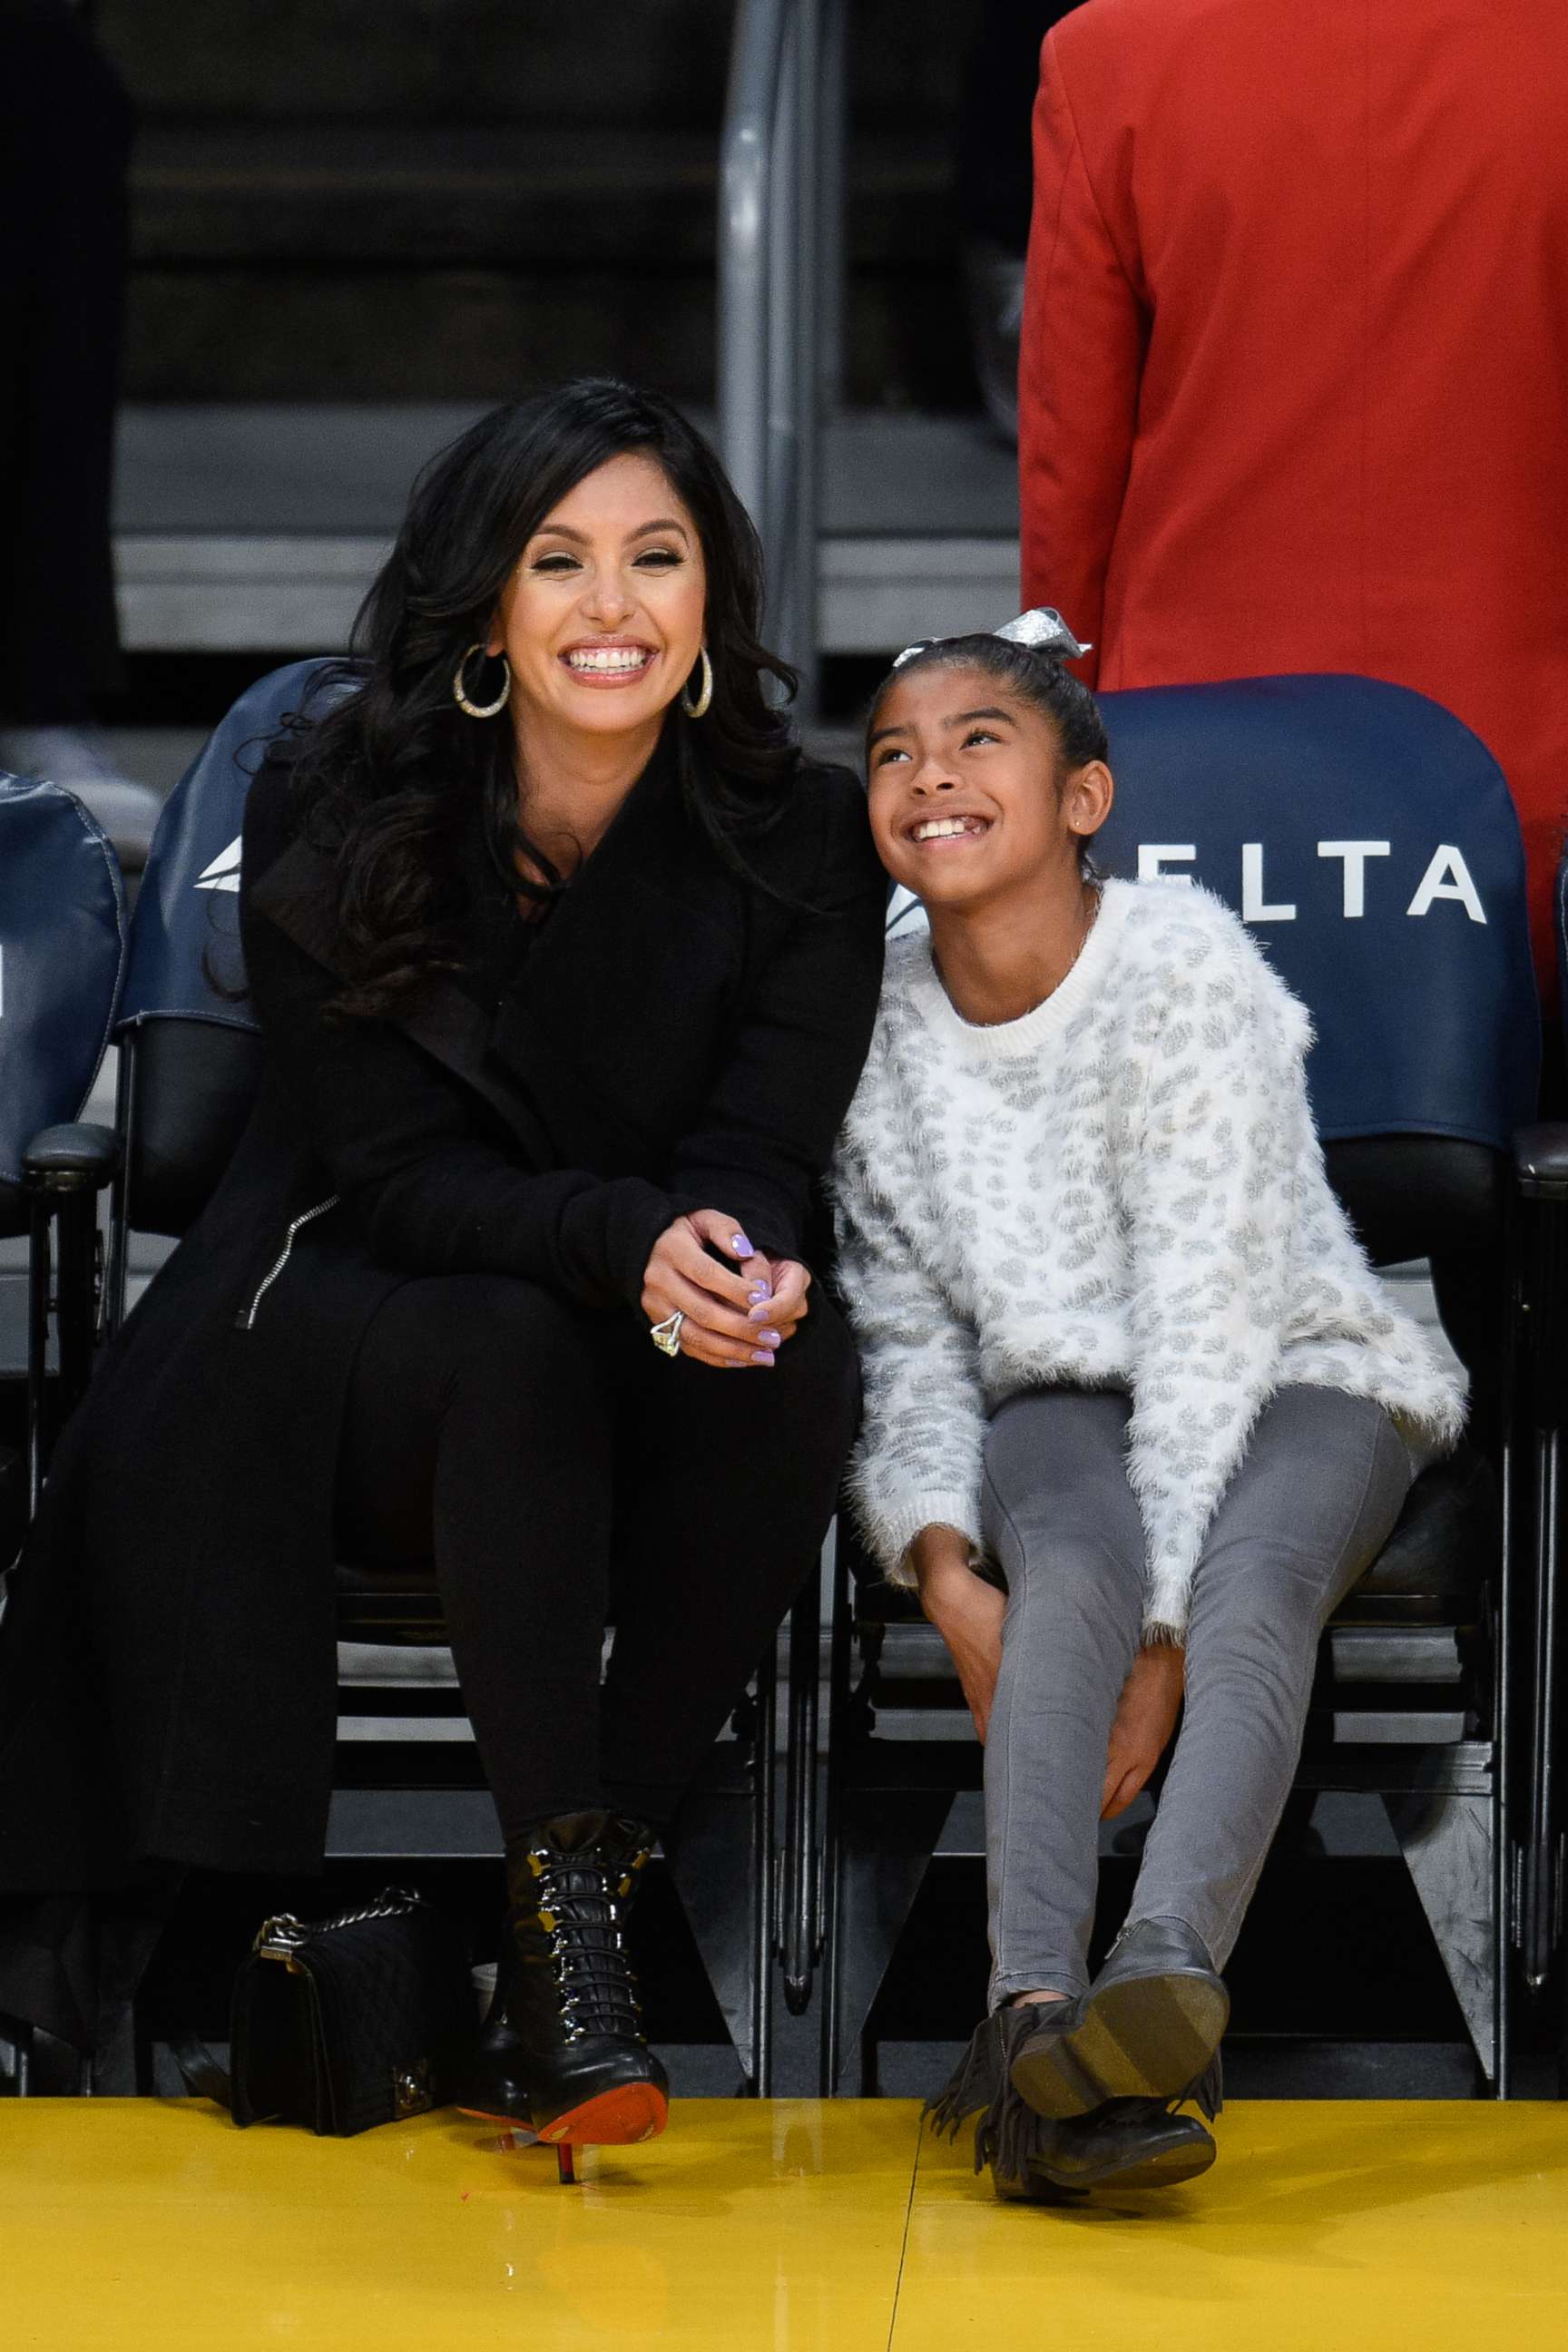 PHOTO: In this Nov. 29, 2015 file photo Vanessa Bryant and Gianna Maria-Onore Bryant attend a basketball game at Staples Center in Los Angeles.